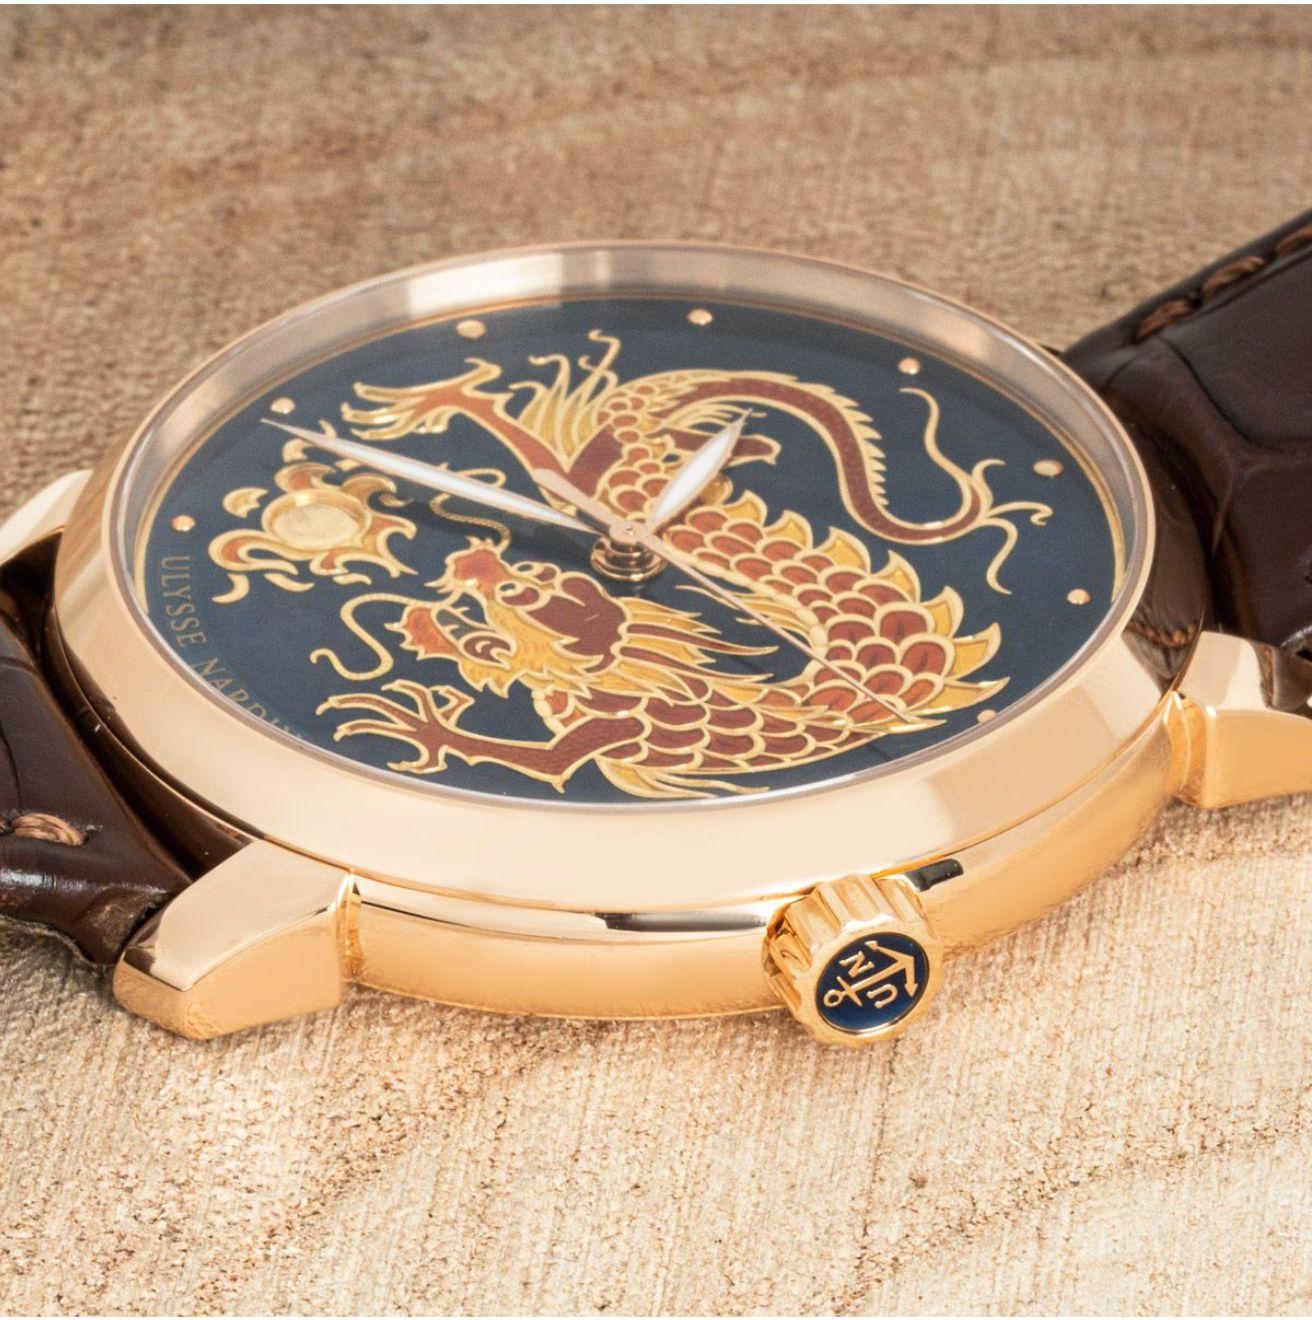 A rose gold limited edition Classico Dragon Wristwatch by Ulysse Nardin. Featuring a stunning blue enamel dial depicting a fire-breathing dragon and a rose gold bezel. Fitted with a sapphire glass and a self-winding automatic movement which can be